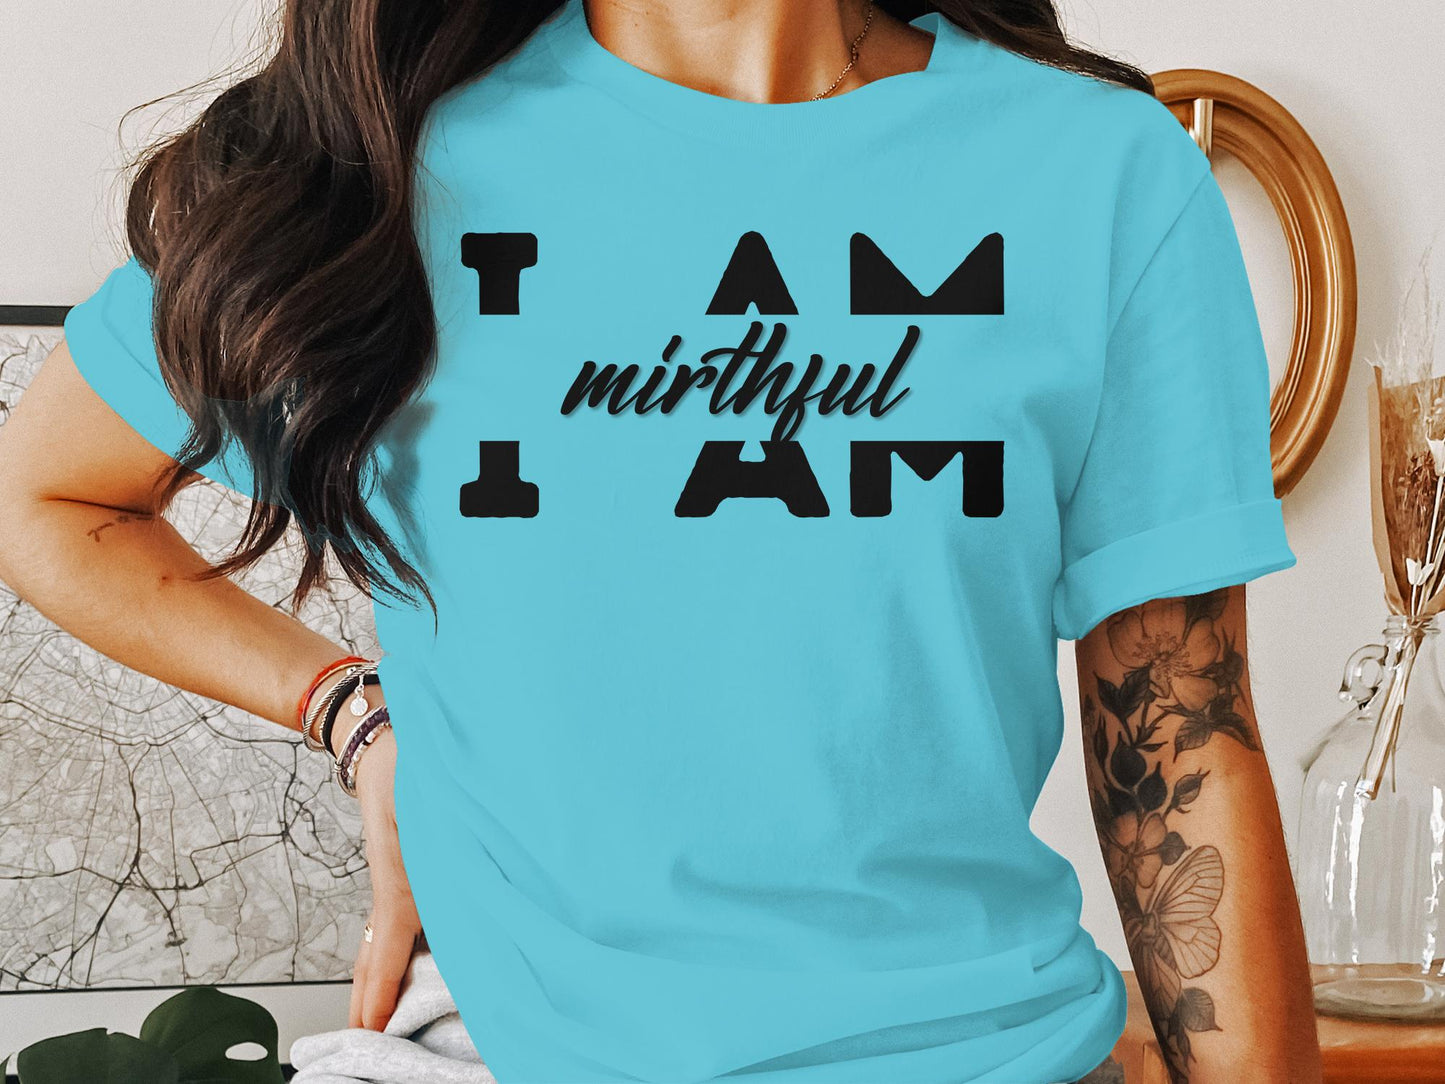 I Am Mirthful - Affirmation Quote Shirt - Encouraging and Motivating